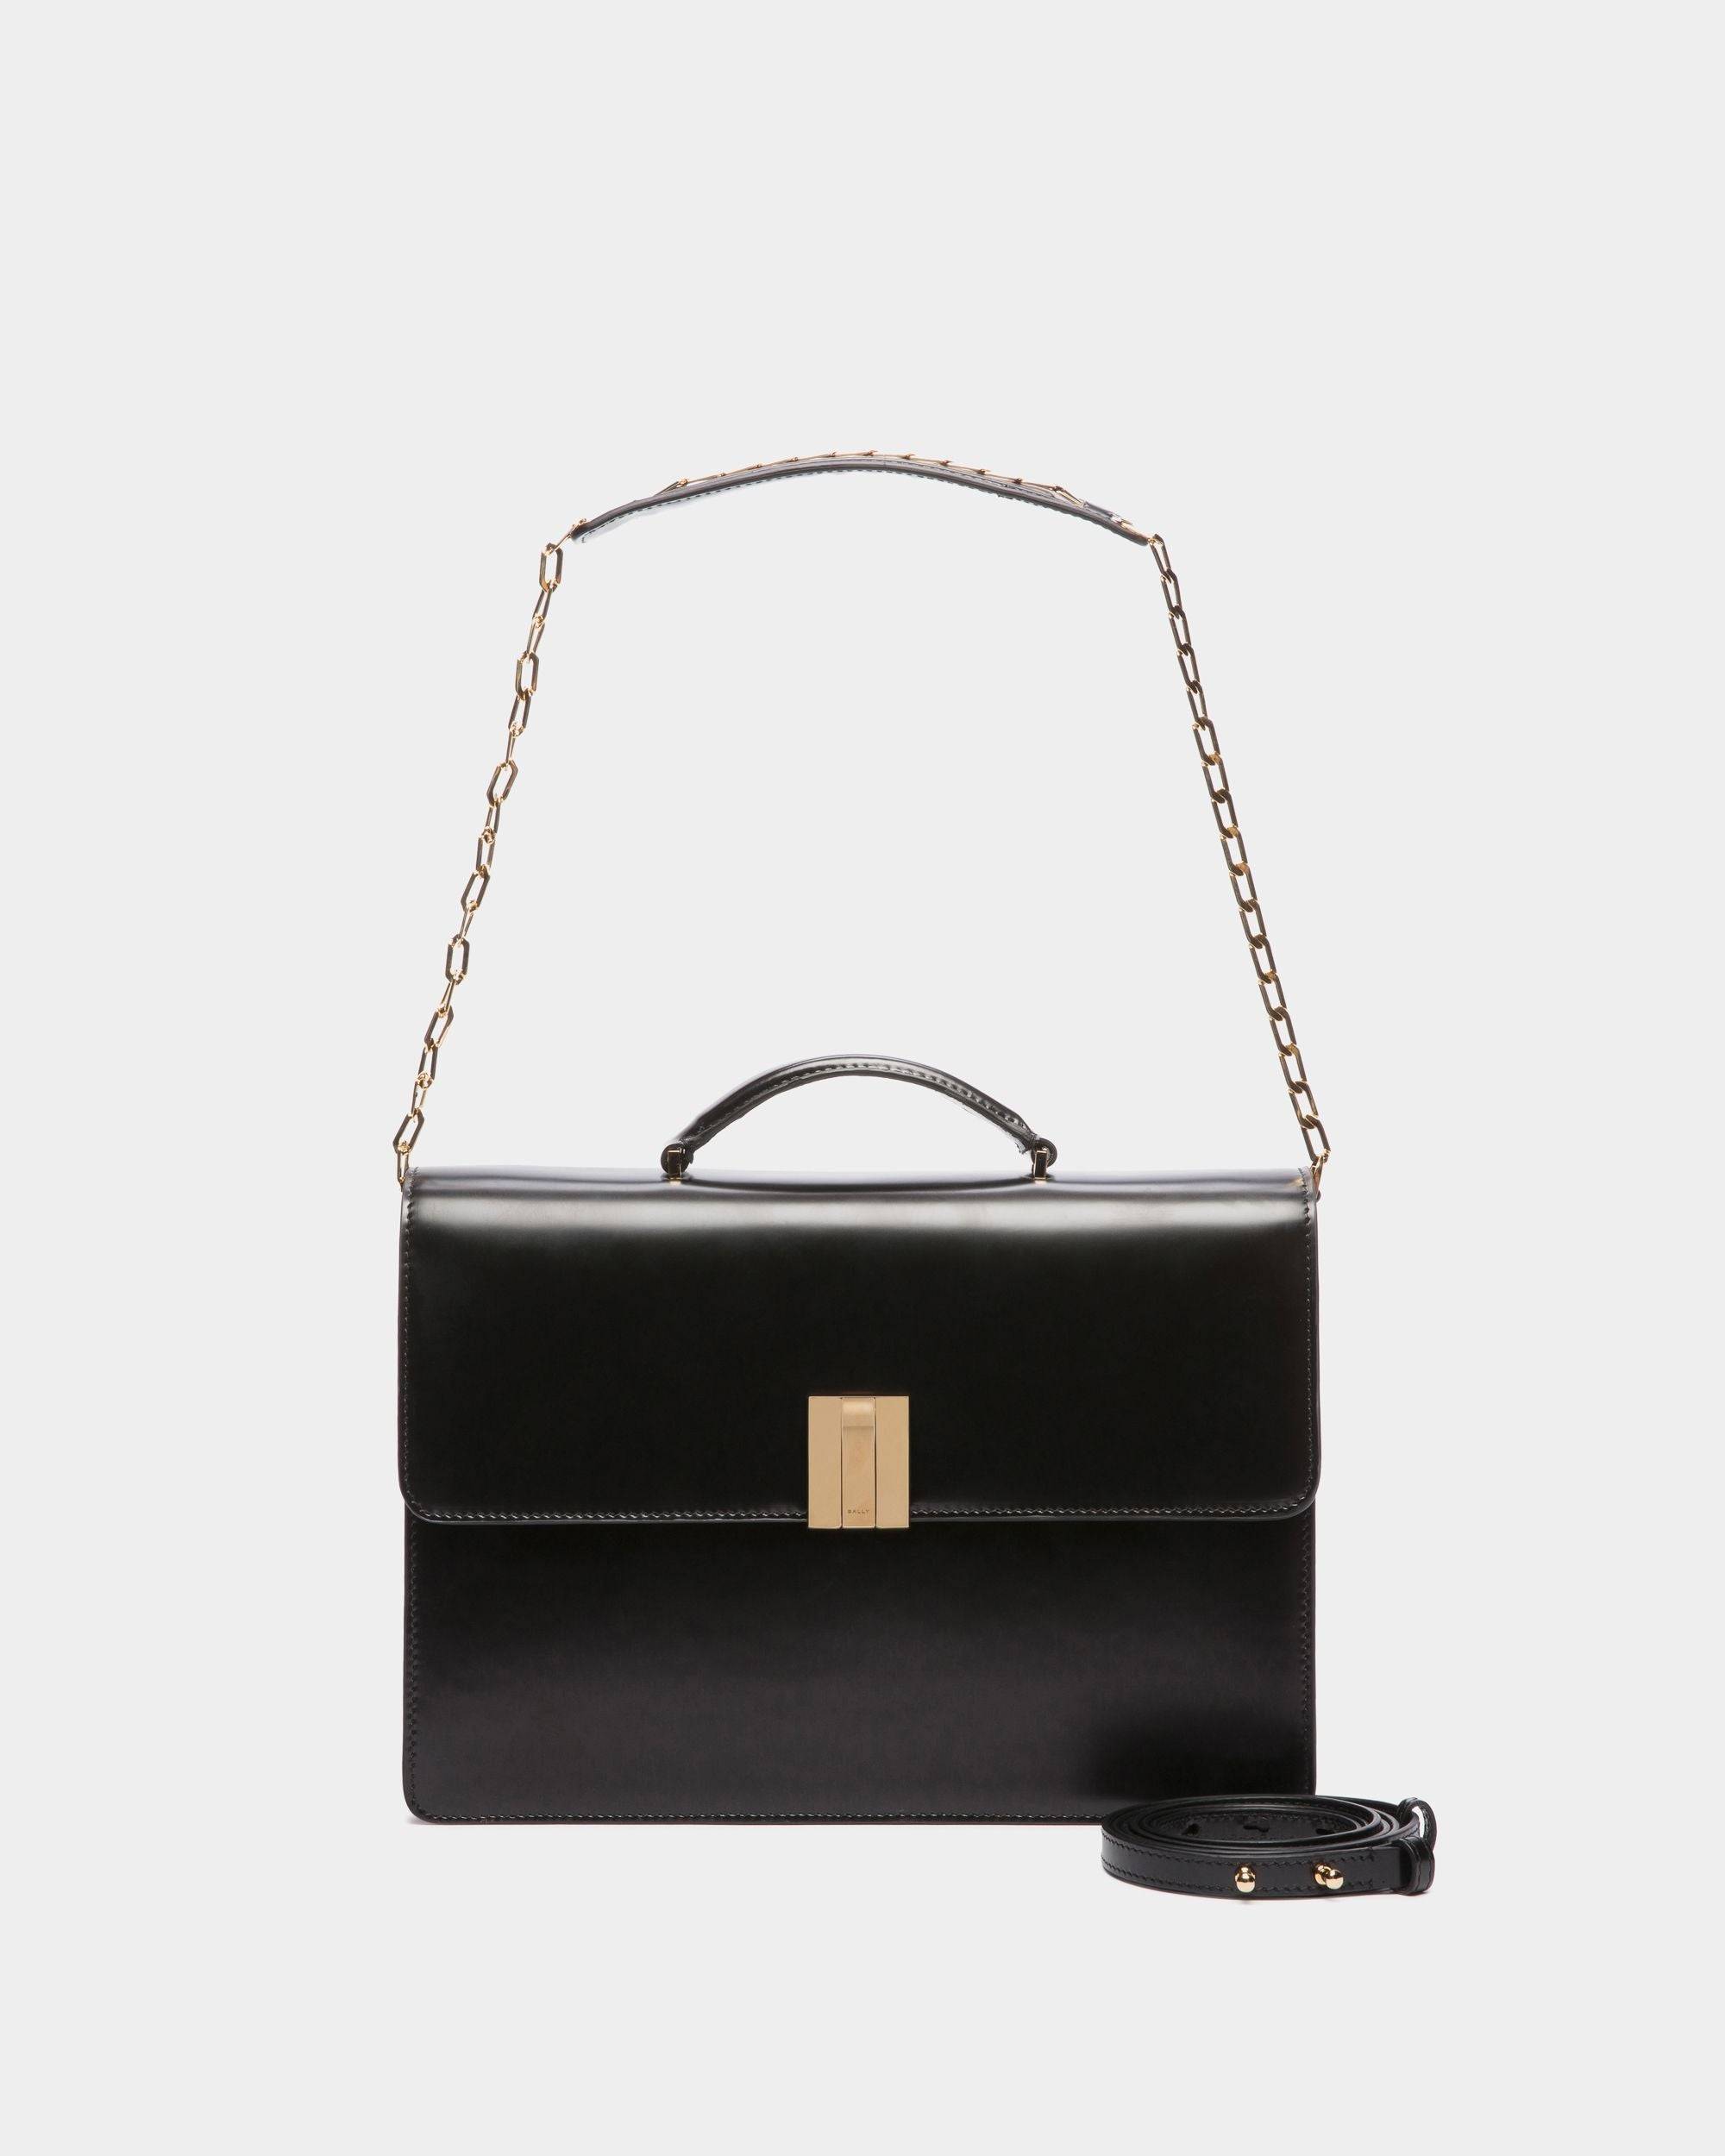 Ollam | Women's Top Handle Bag in Black Brushed Leather | Bally | Still Life Detail